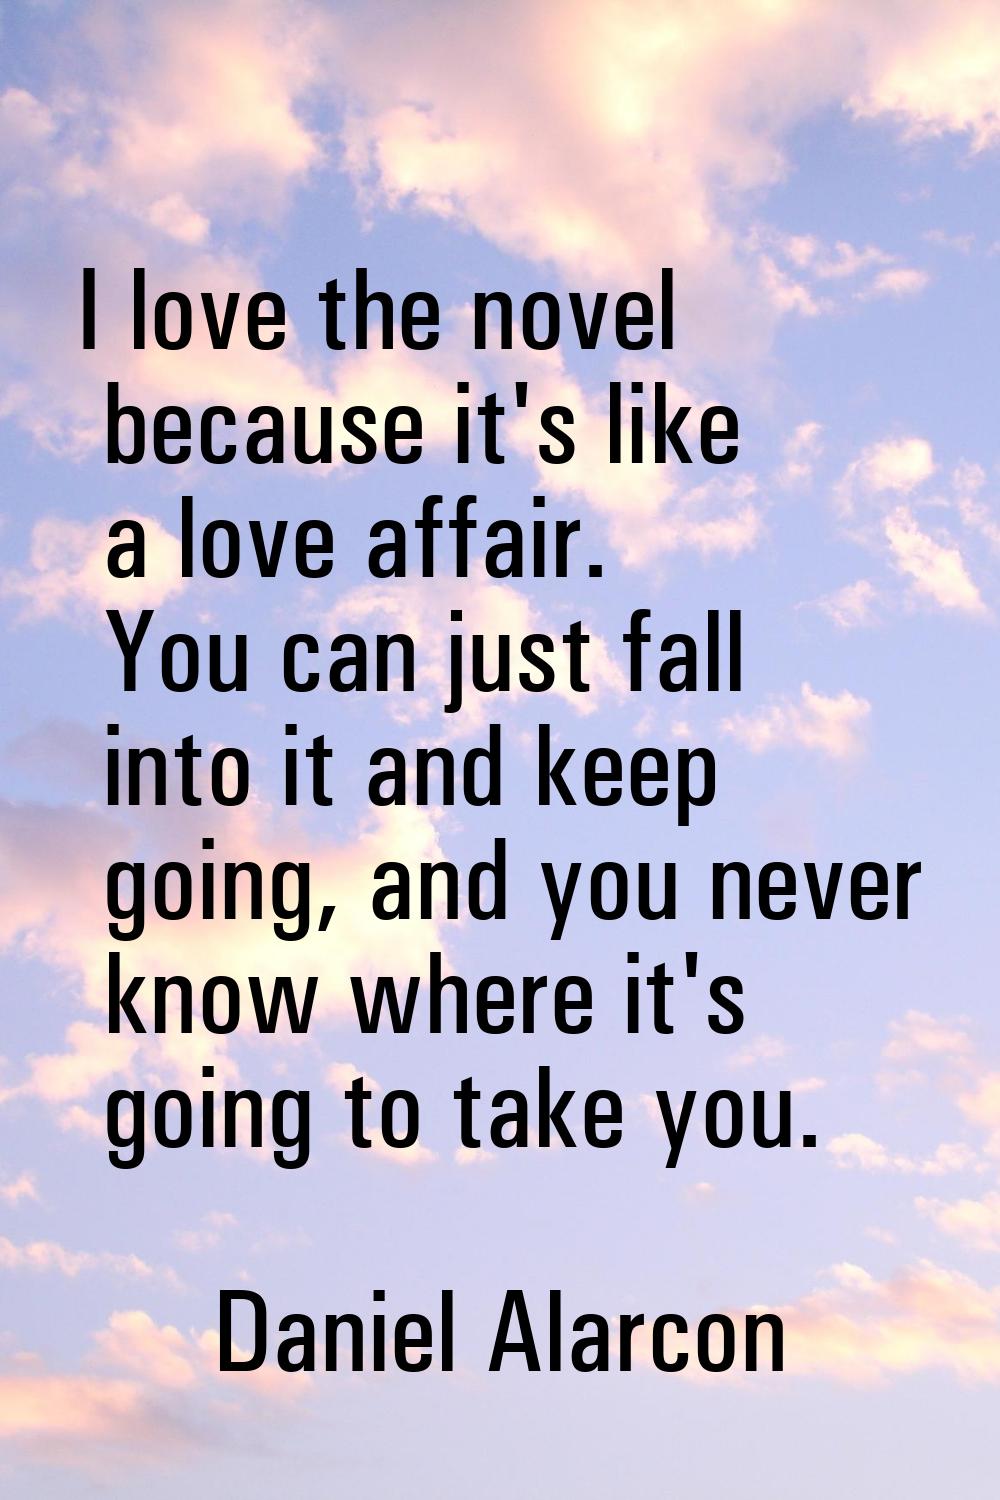 I love the novel because it's like a love affair. You can just fall into it and keep going, and you